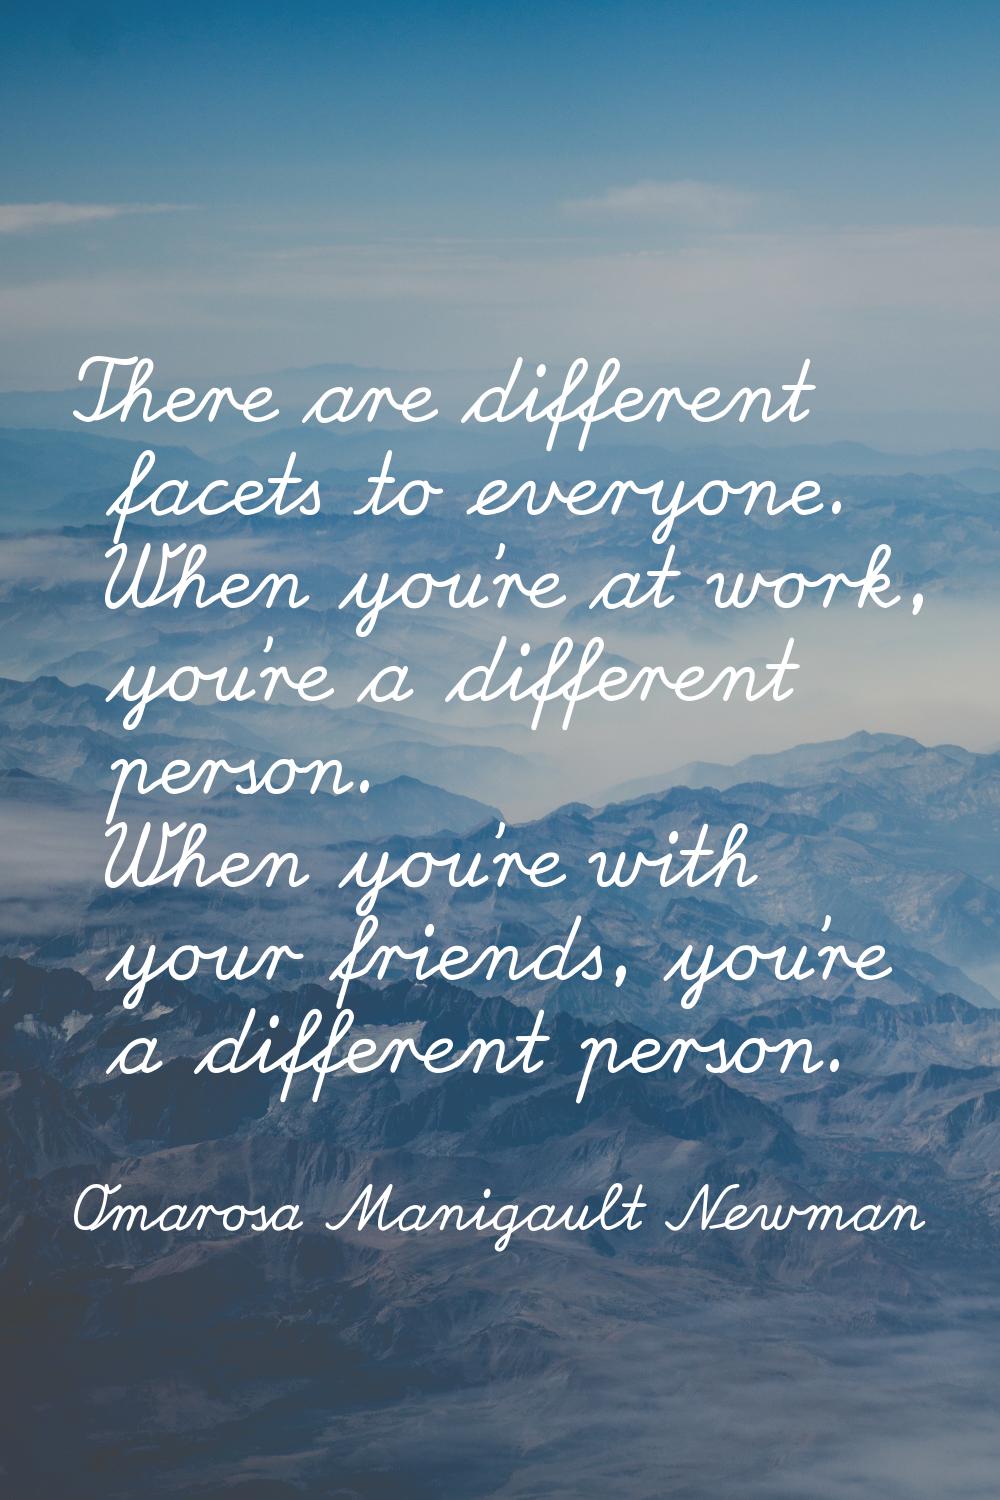 There are different facets to everyone. When you're at work, you're a different person. When you're